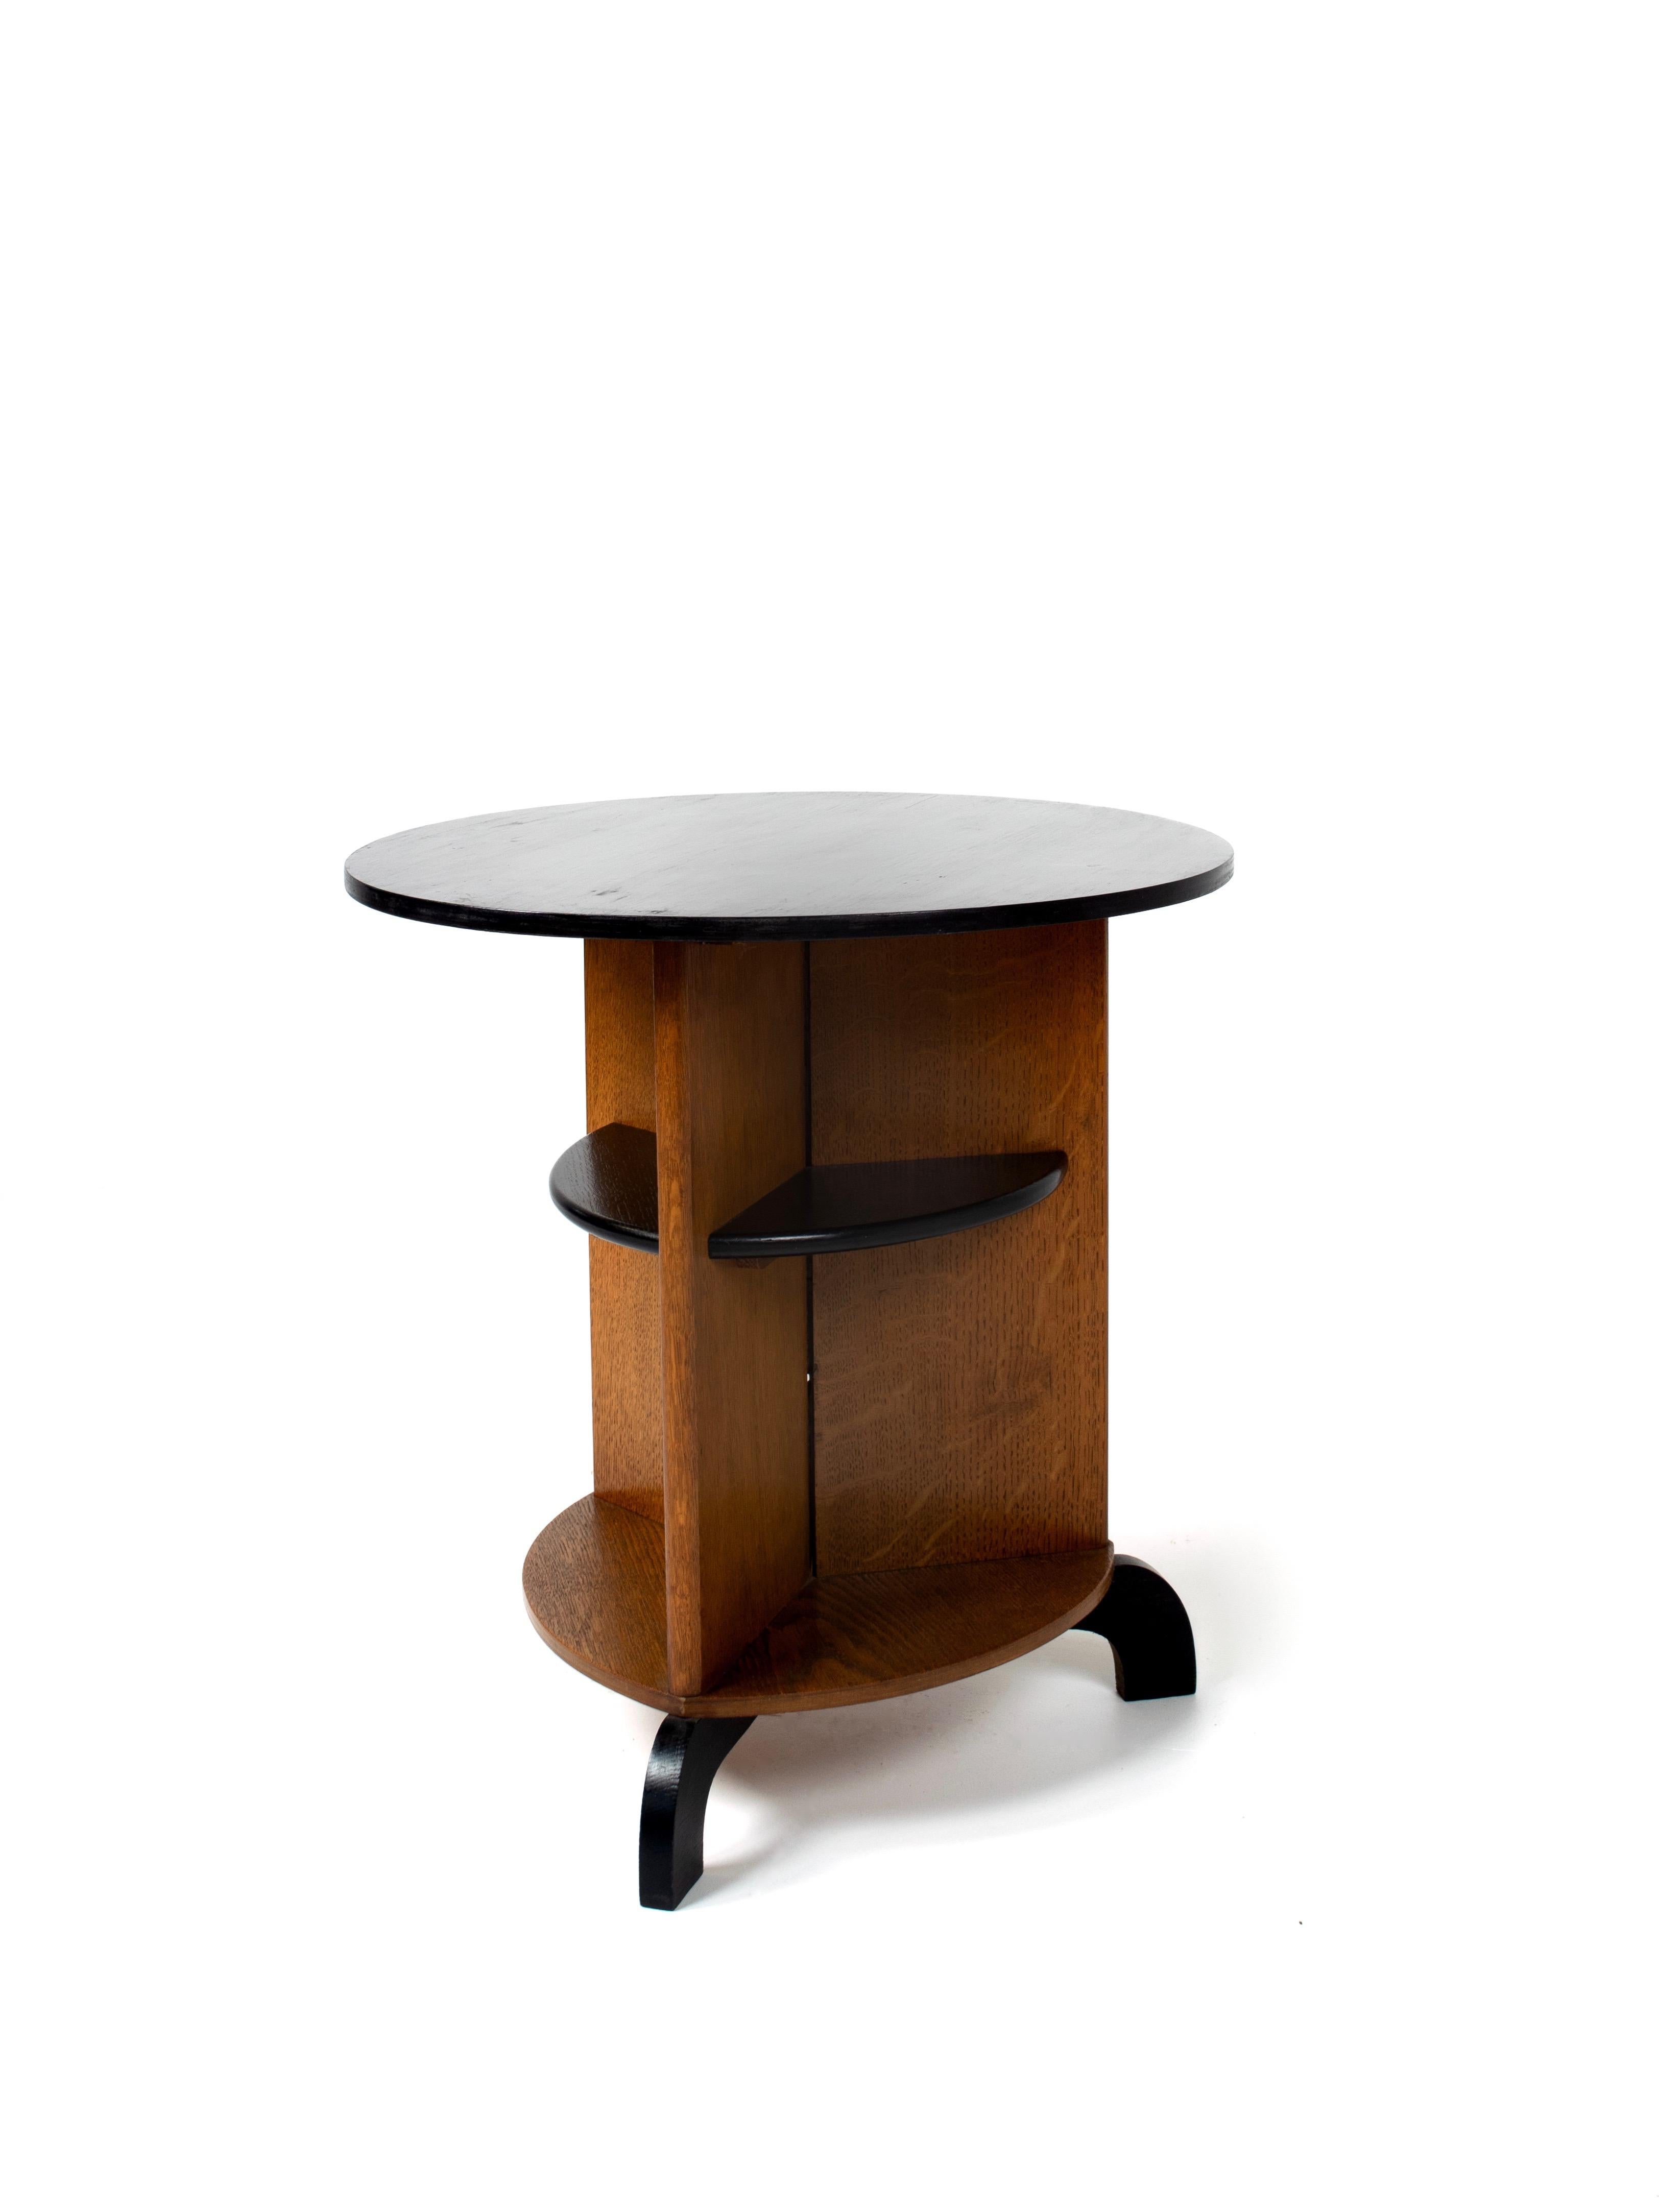 Beautiful Dutch Art Deco from The Hague, The Hague School, side, or coffee table. The design is sober, but friendly with the round forms and three legs under it. It is 57 cm high and has a diameter of 54 cm. It a combination of oak with black